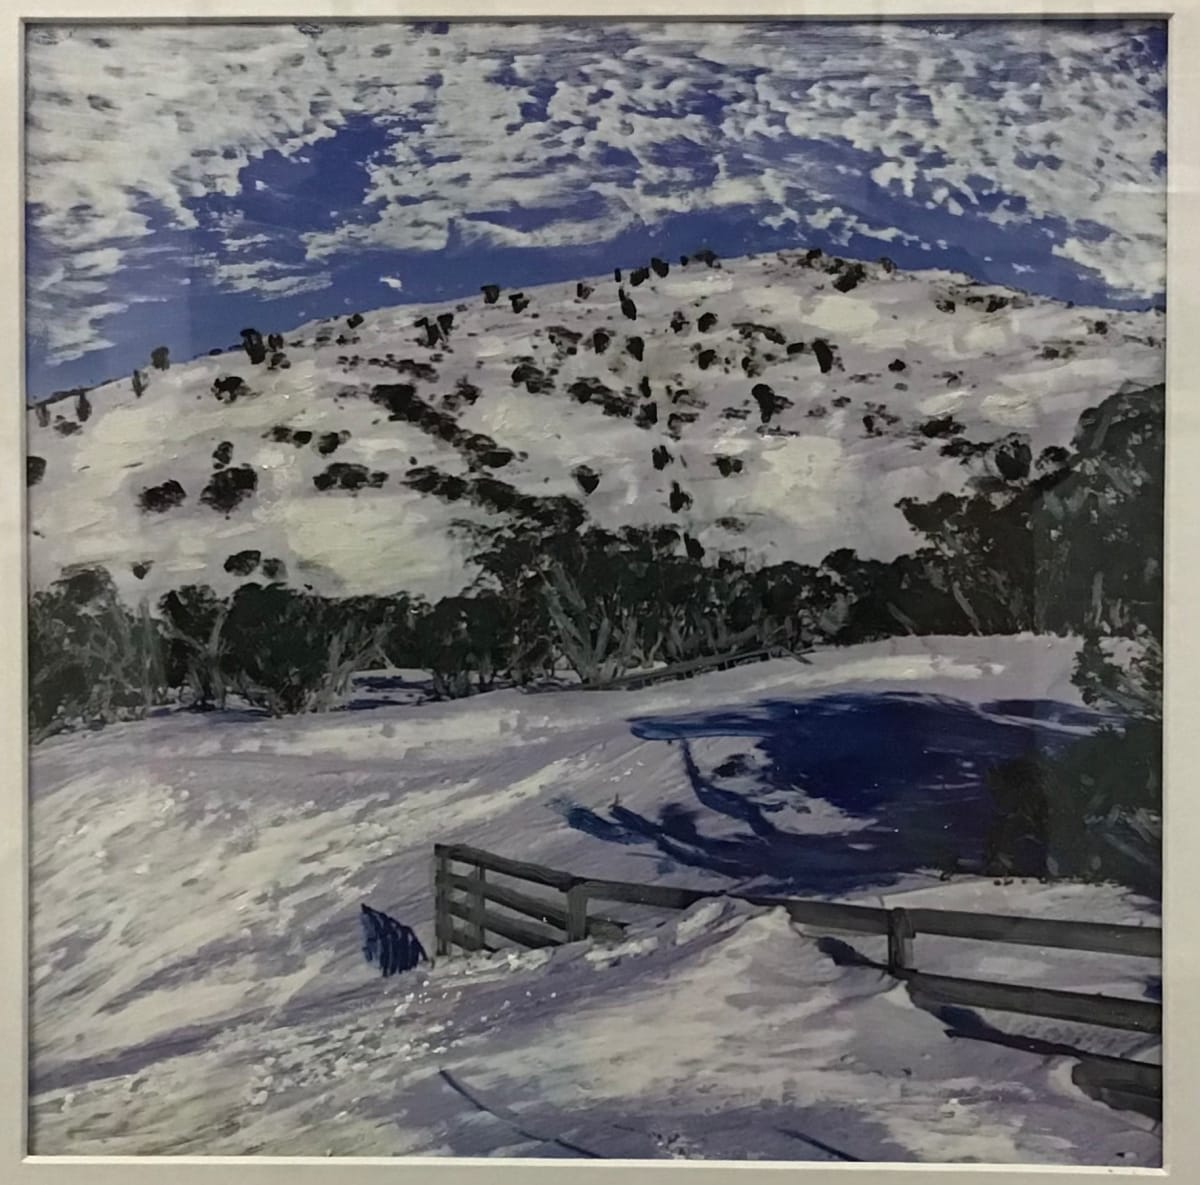 The Mountain by Danielle Devine  Image: Mount Perisher.
An iconic spot to all who enjoy snow sports, we head there on bluebird days and powder days alike.
Known for its runs, the old chair and May tails of prowess down its fun filled slopes.